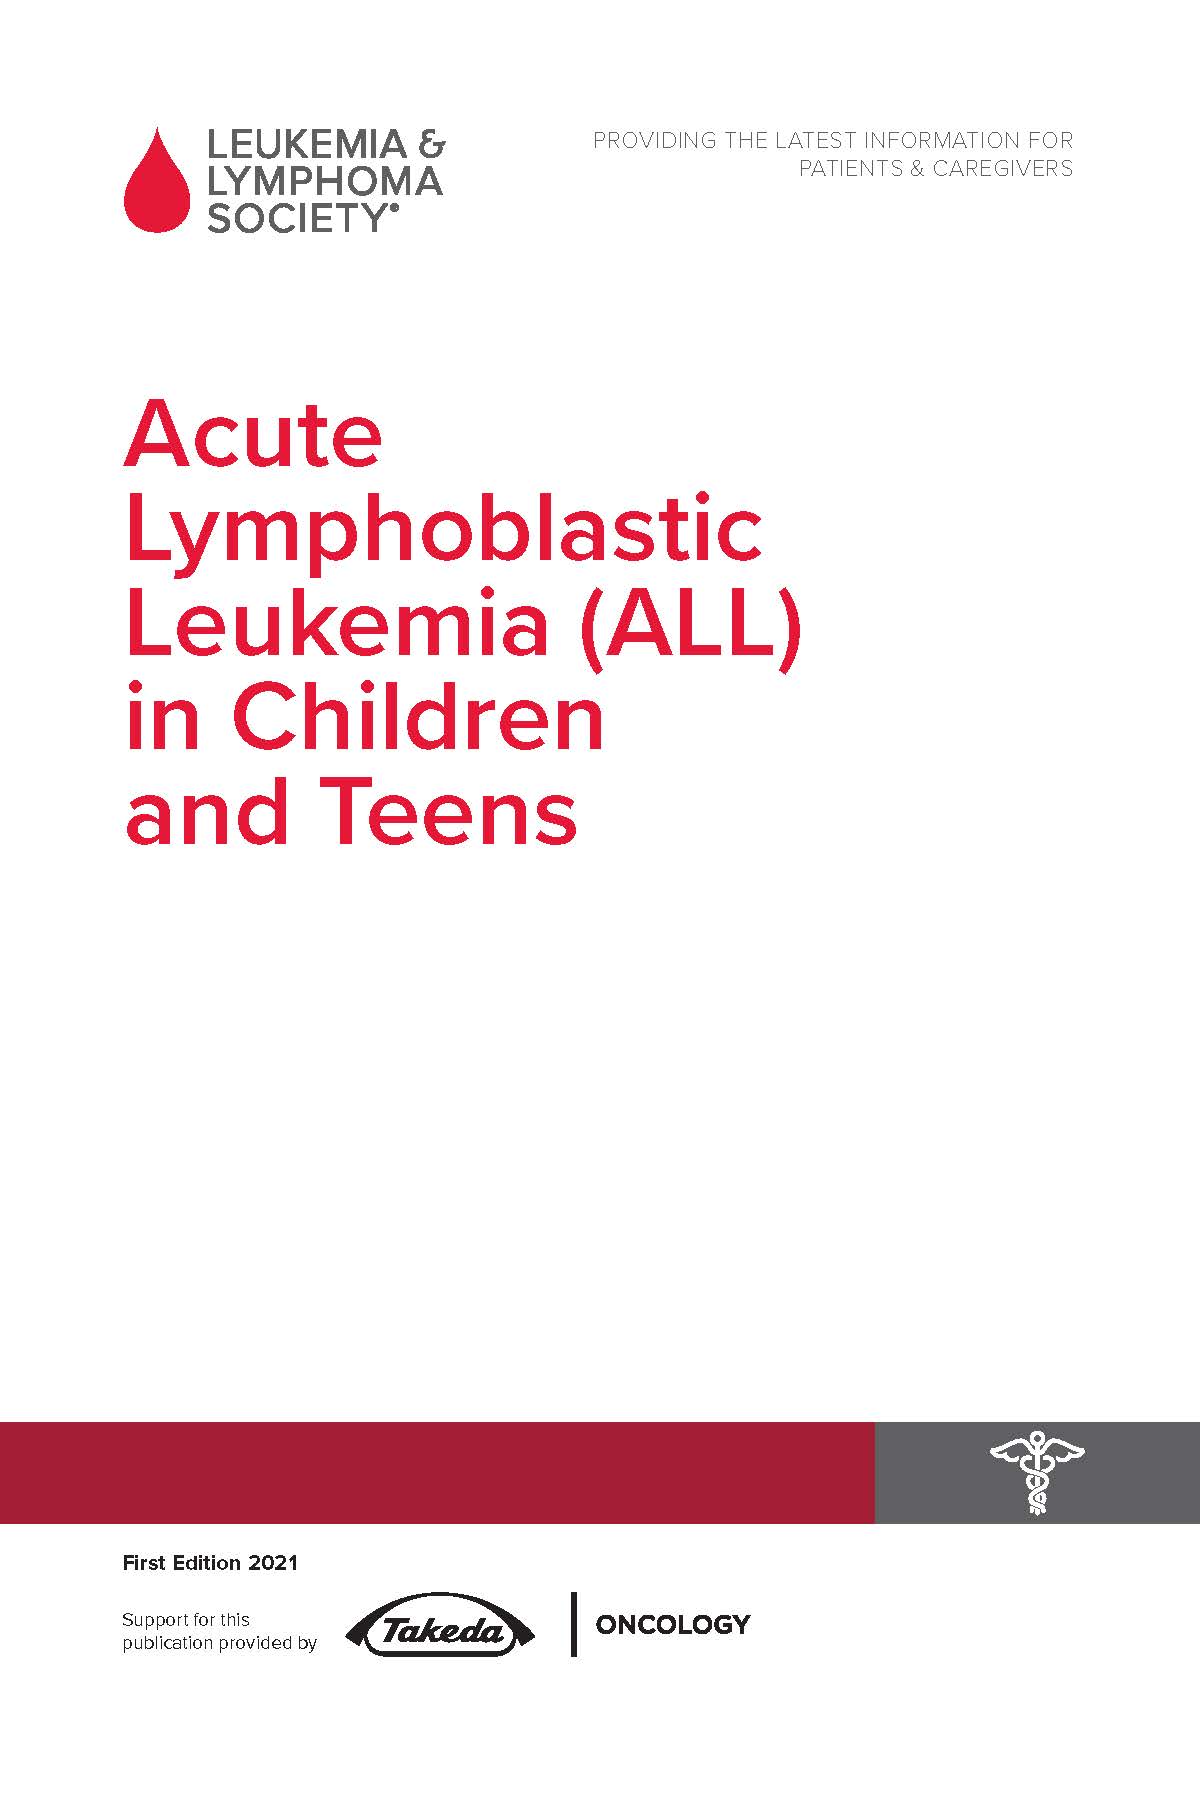 Download Or Order Free Information Booklets Leukemia and Lymphoma Society Adult Picture